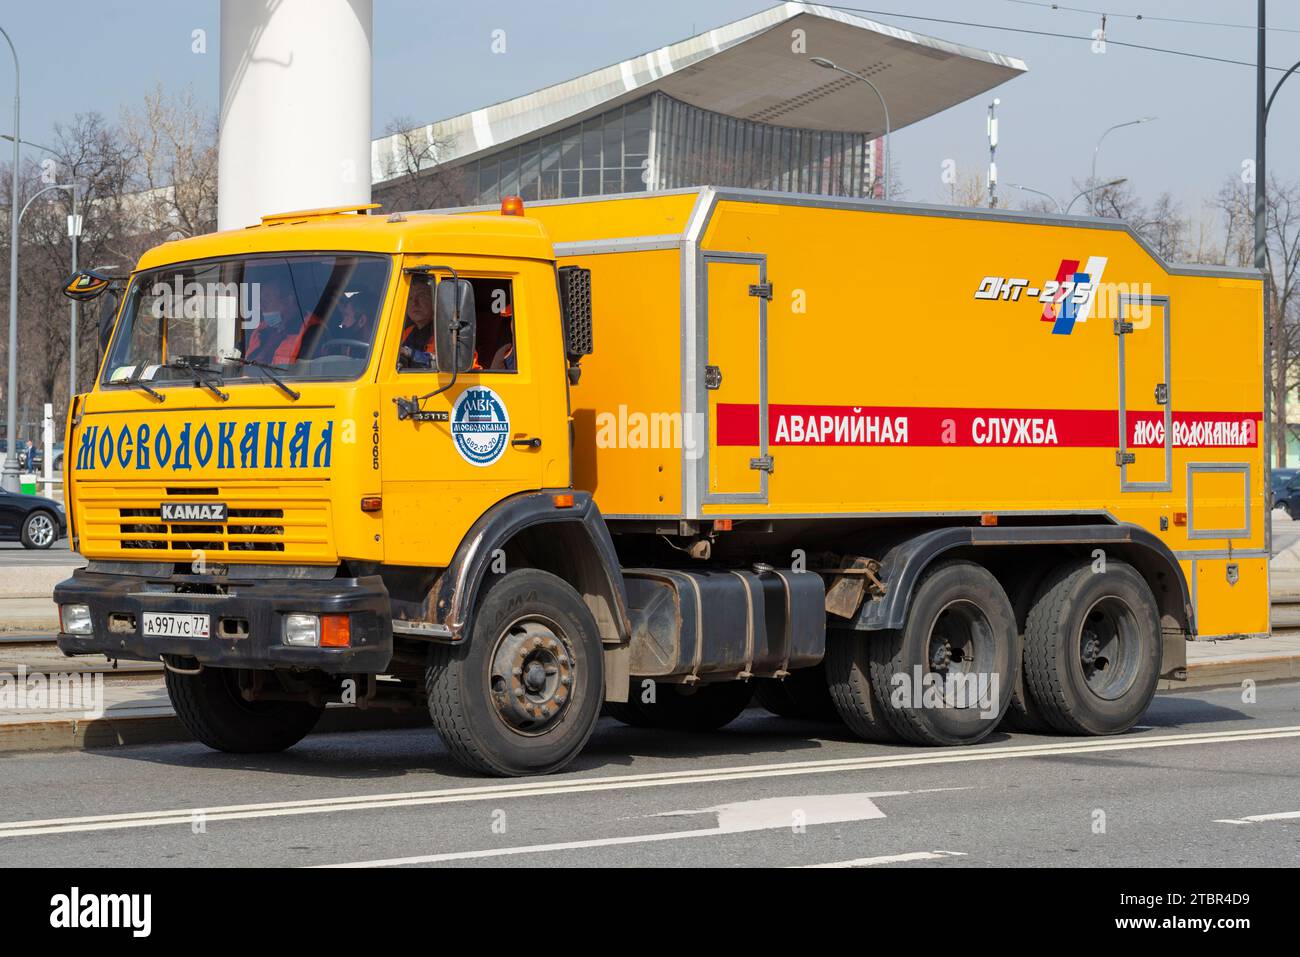 MOSCOW, RUSSIA - APRIL 14, 2021: Emergency vehicle of Mosvodokanal Kamaz-65115 close-up on a sunny April day Stock Photo